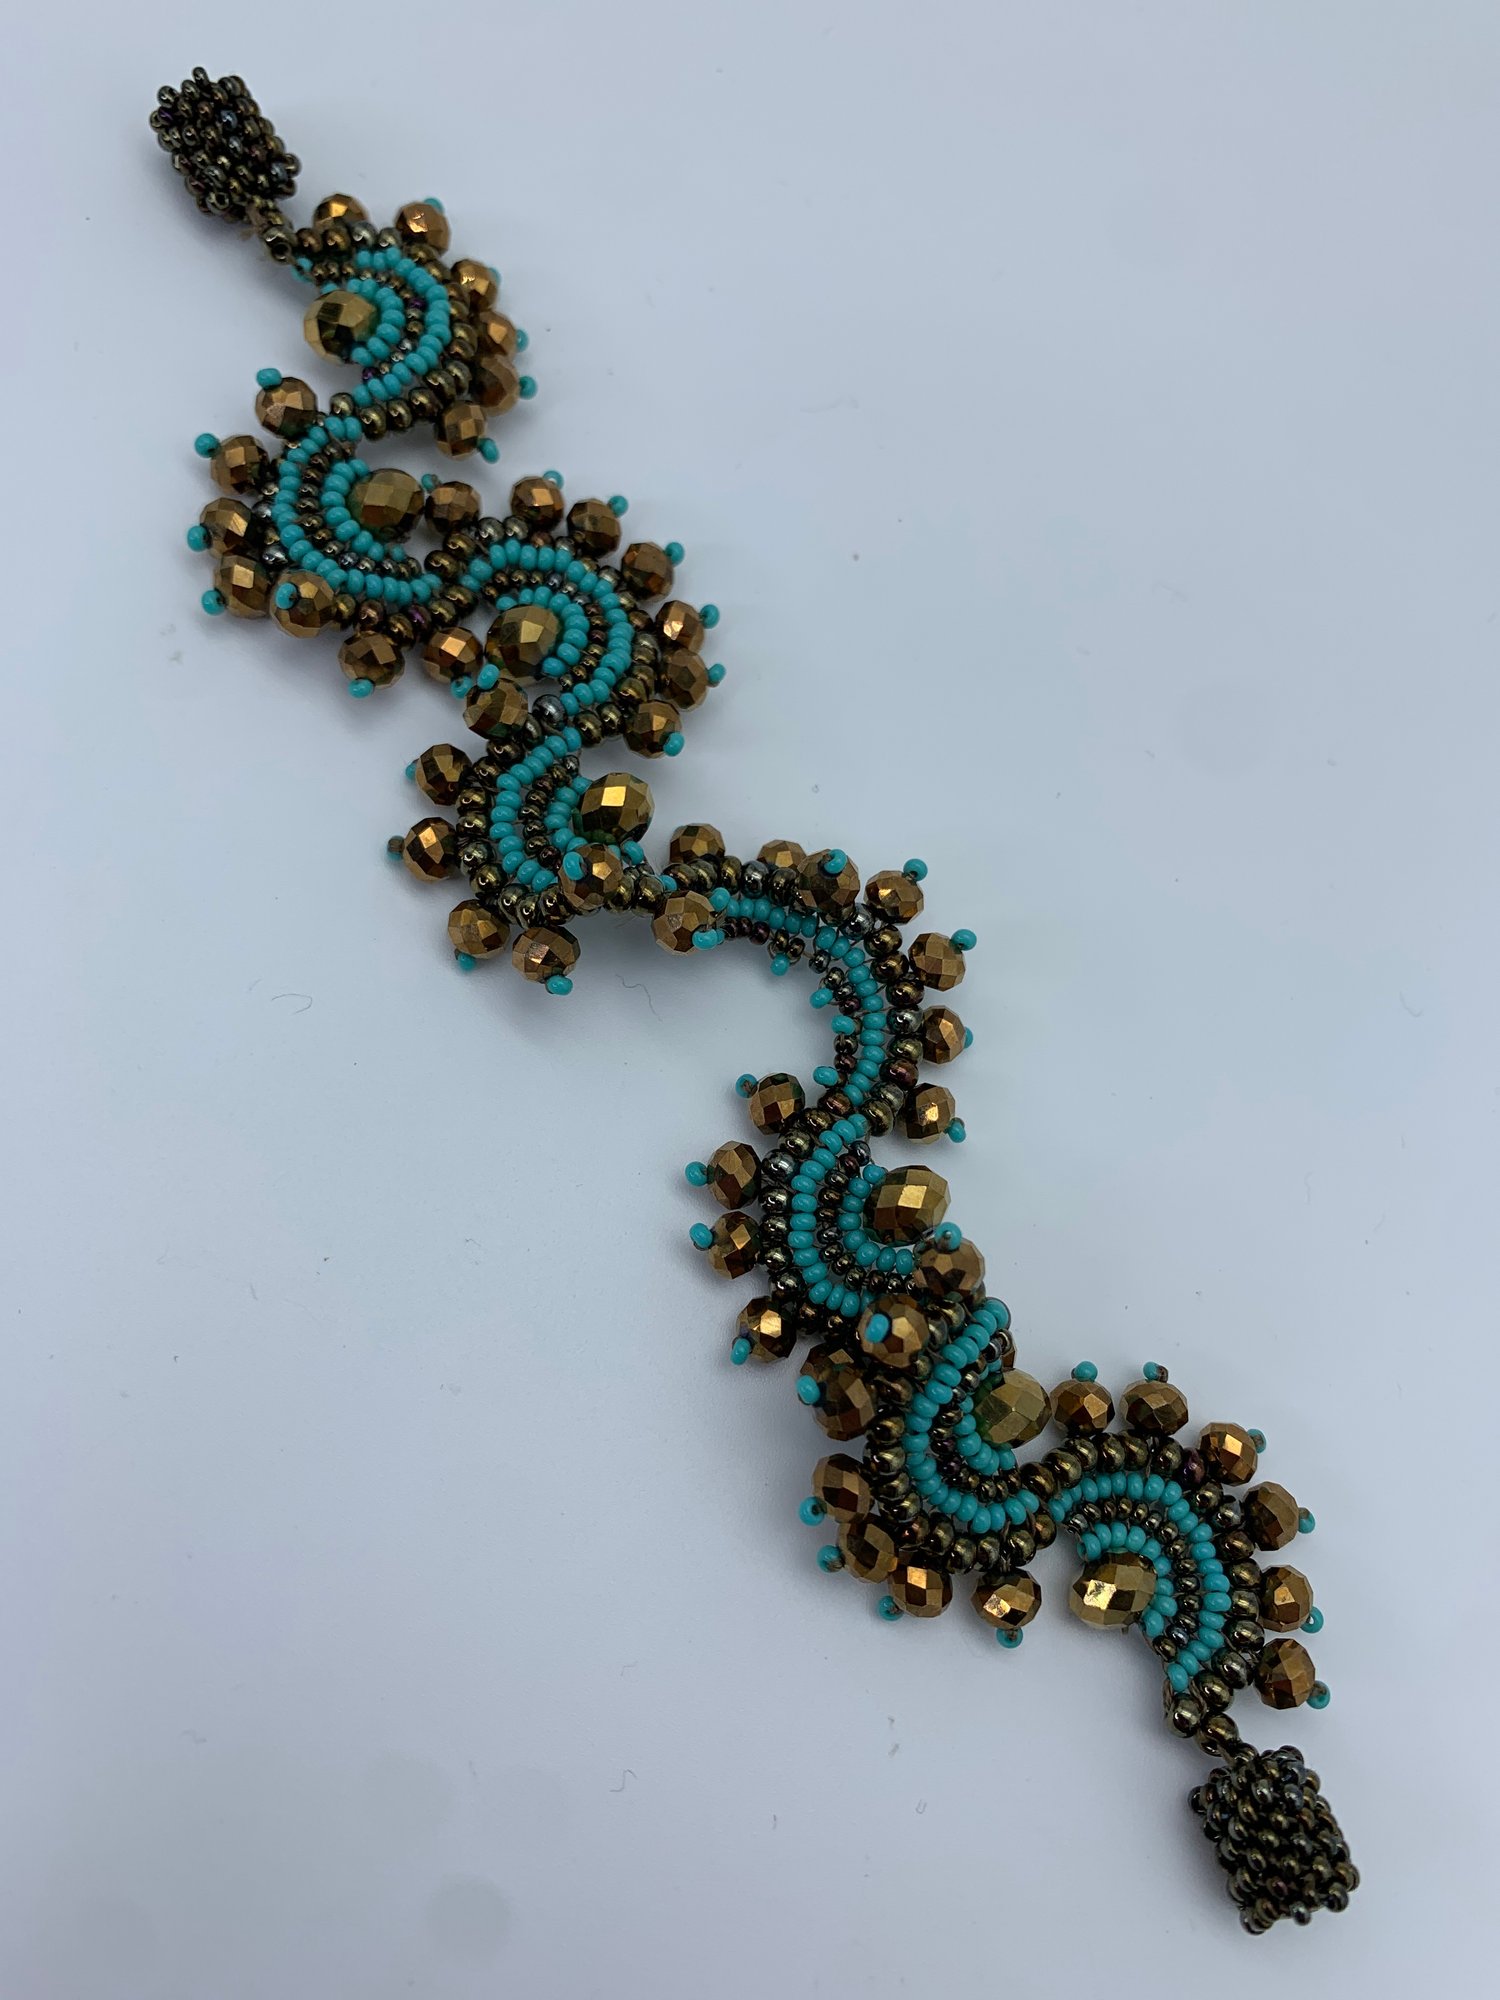 Magnetic Clasp Hand Stitched Bead Bracelet In Turquoise And Metallic